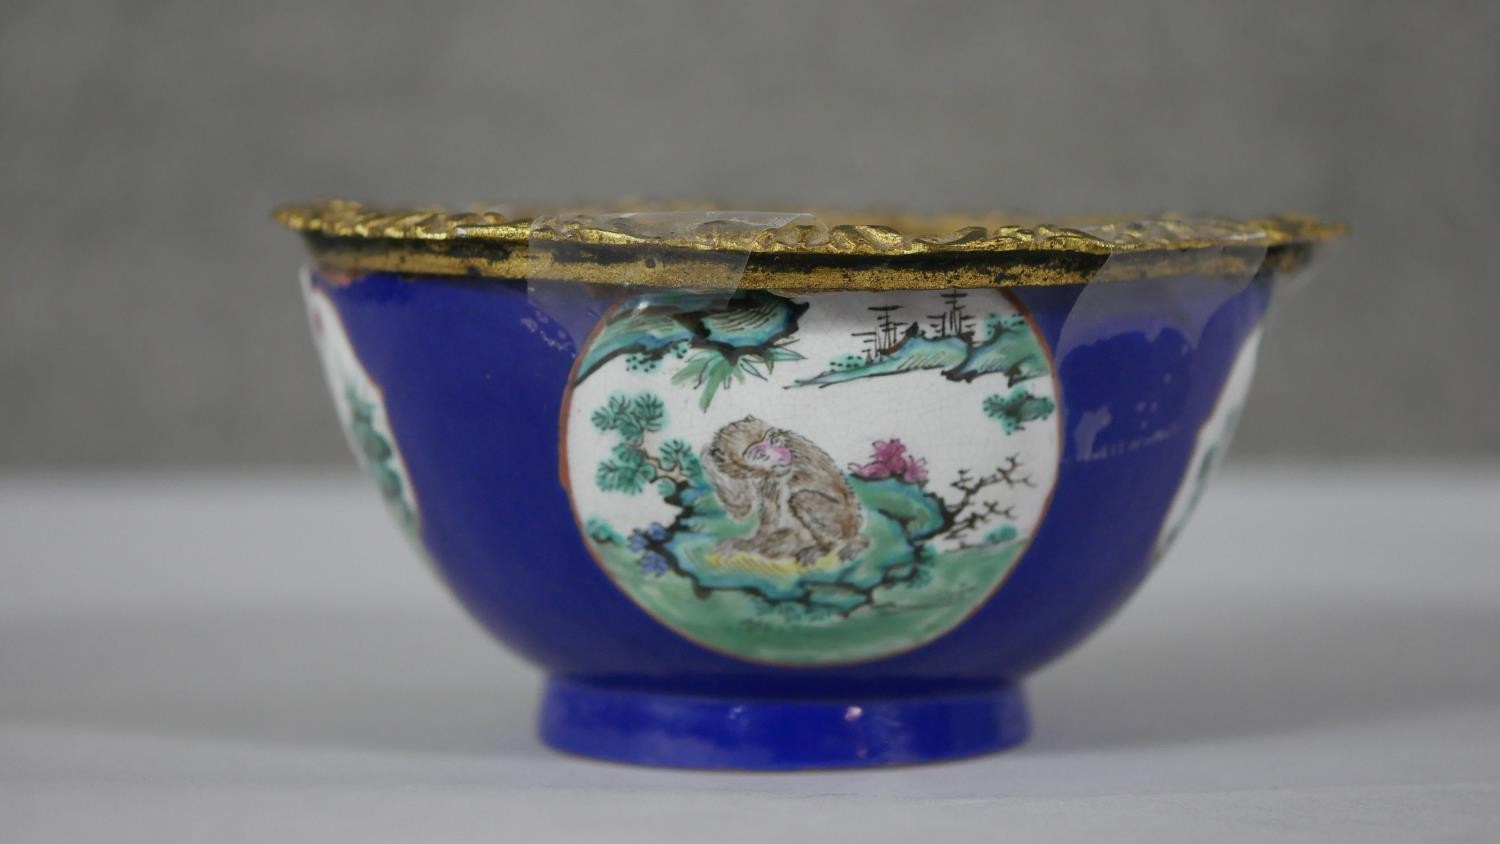 A Chinese hand painted ceramic bowl (used to be a vase) with added gilt ormolu edge. The bowl with a